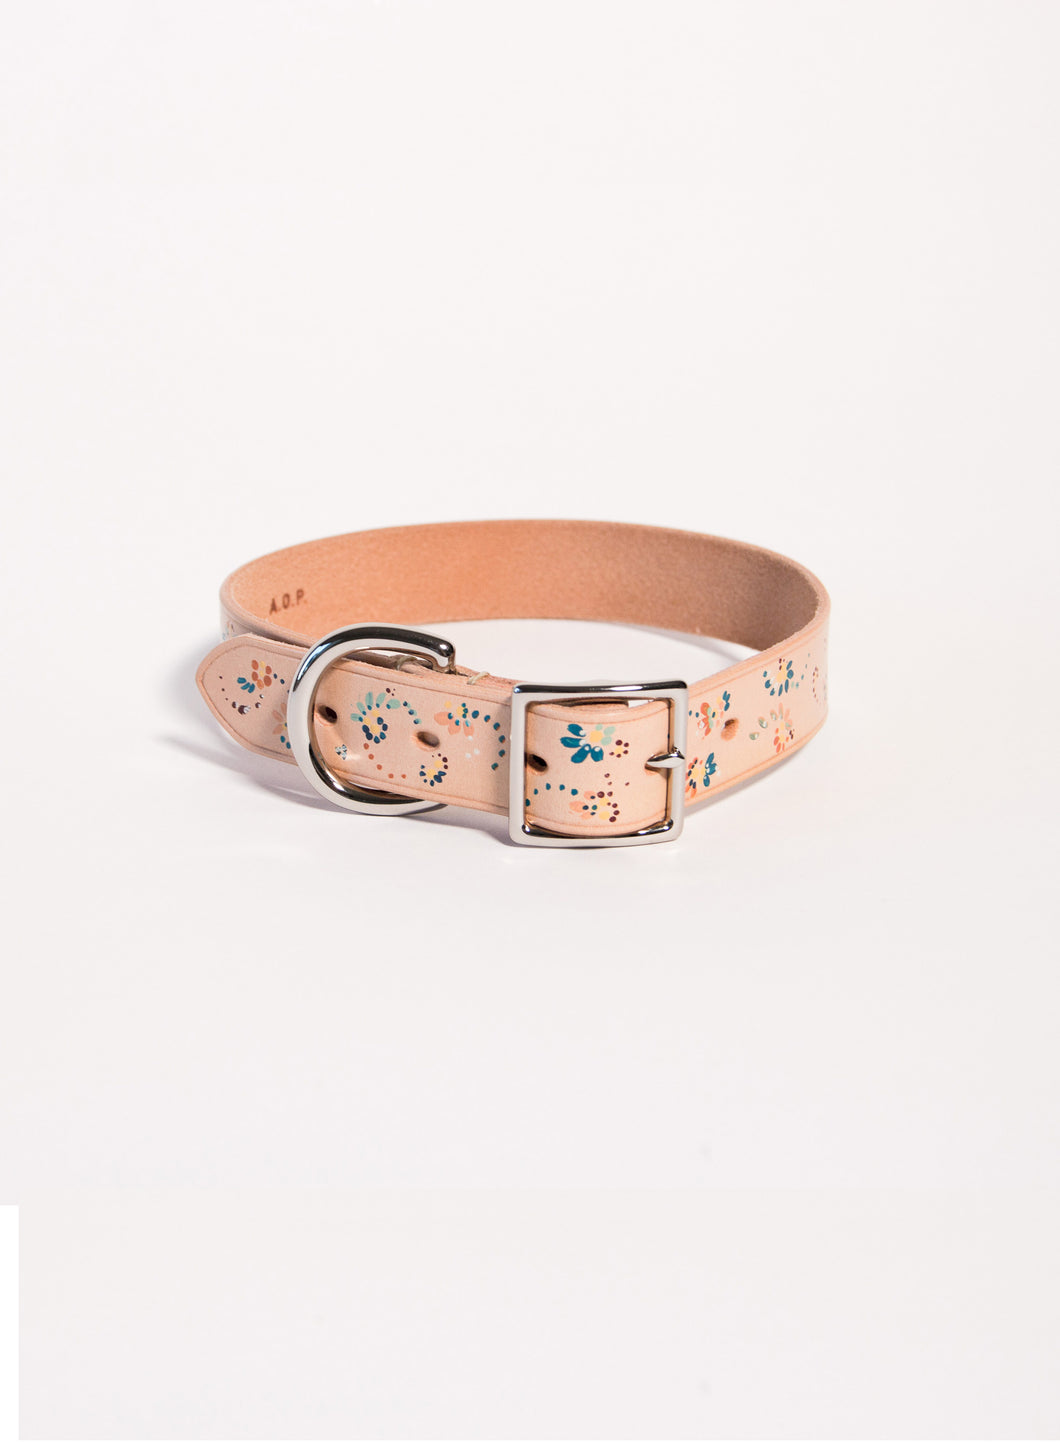 Hand Painted Leather Dog Collar